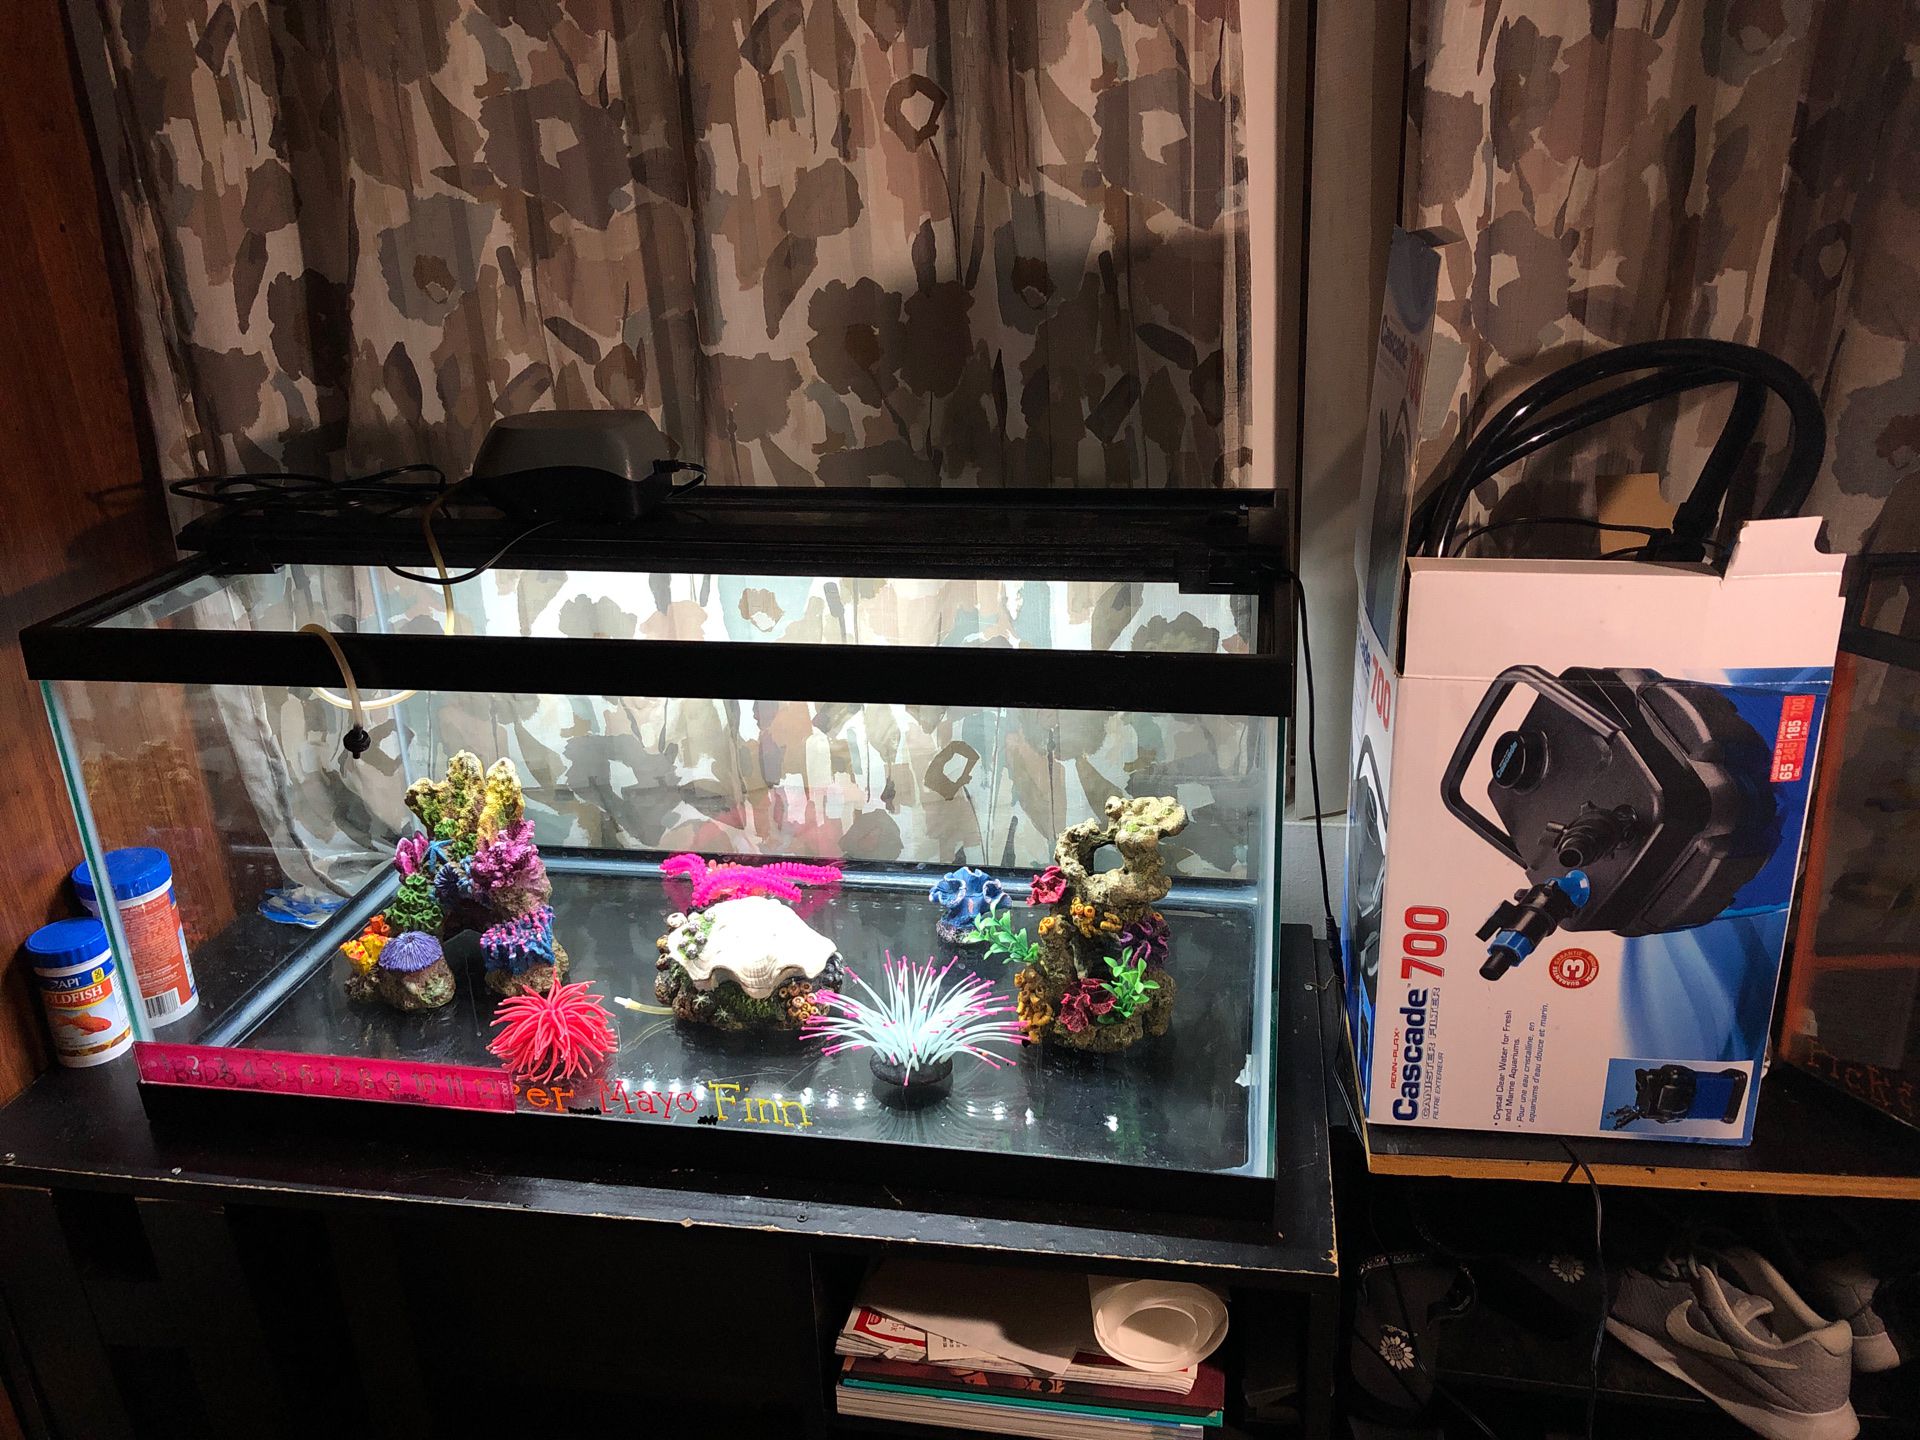 45 gallon fish tank with filter, decorations, oxygen pump, rocks, and light